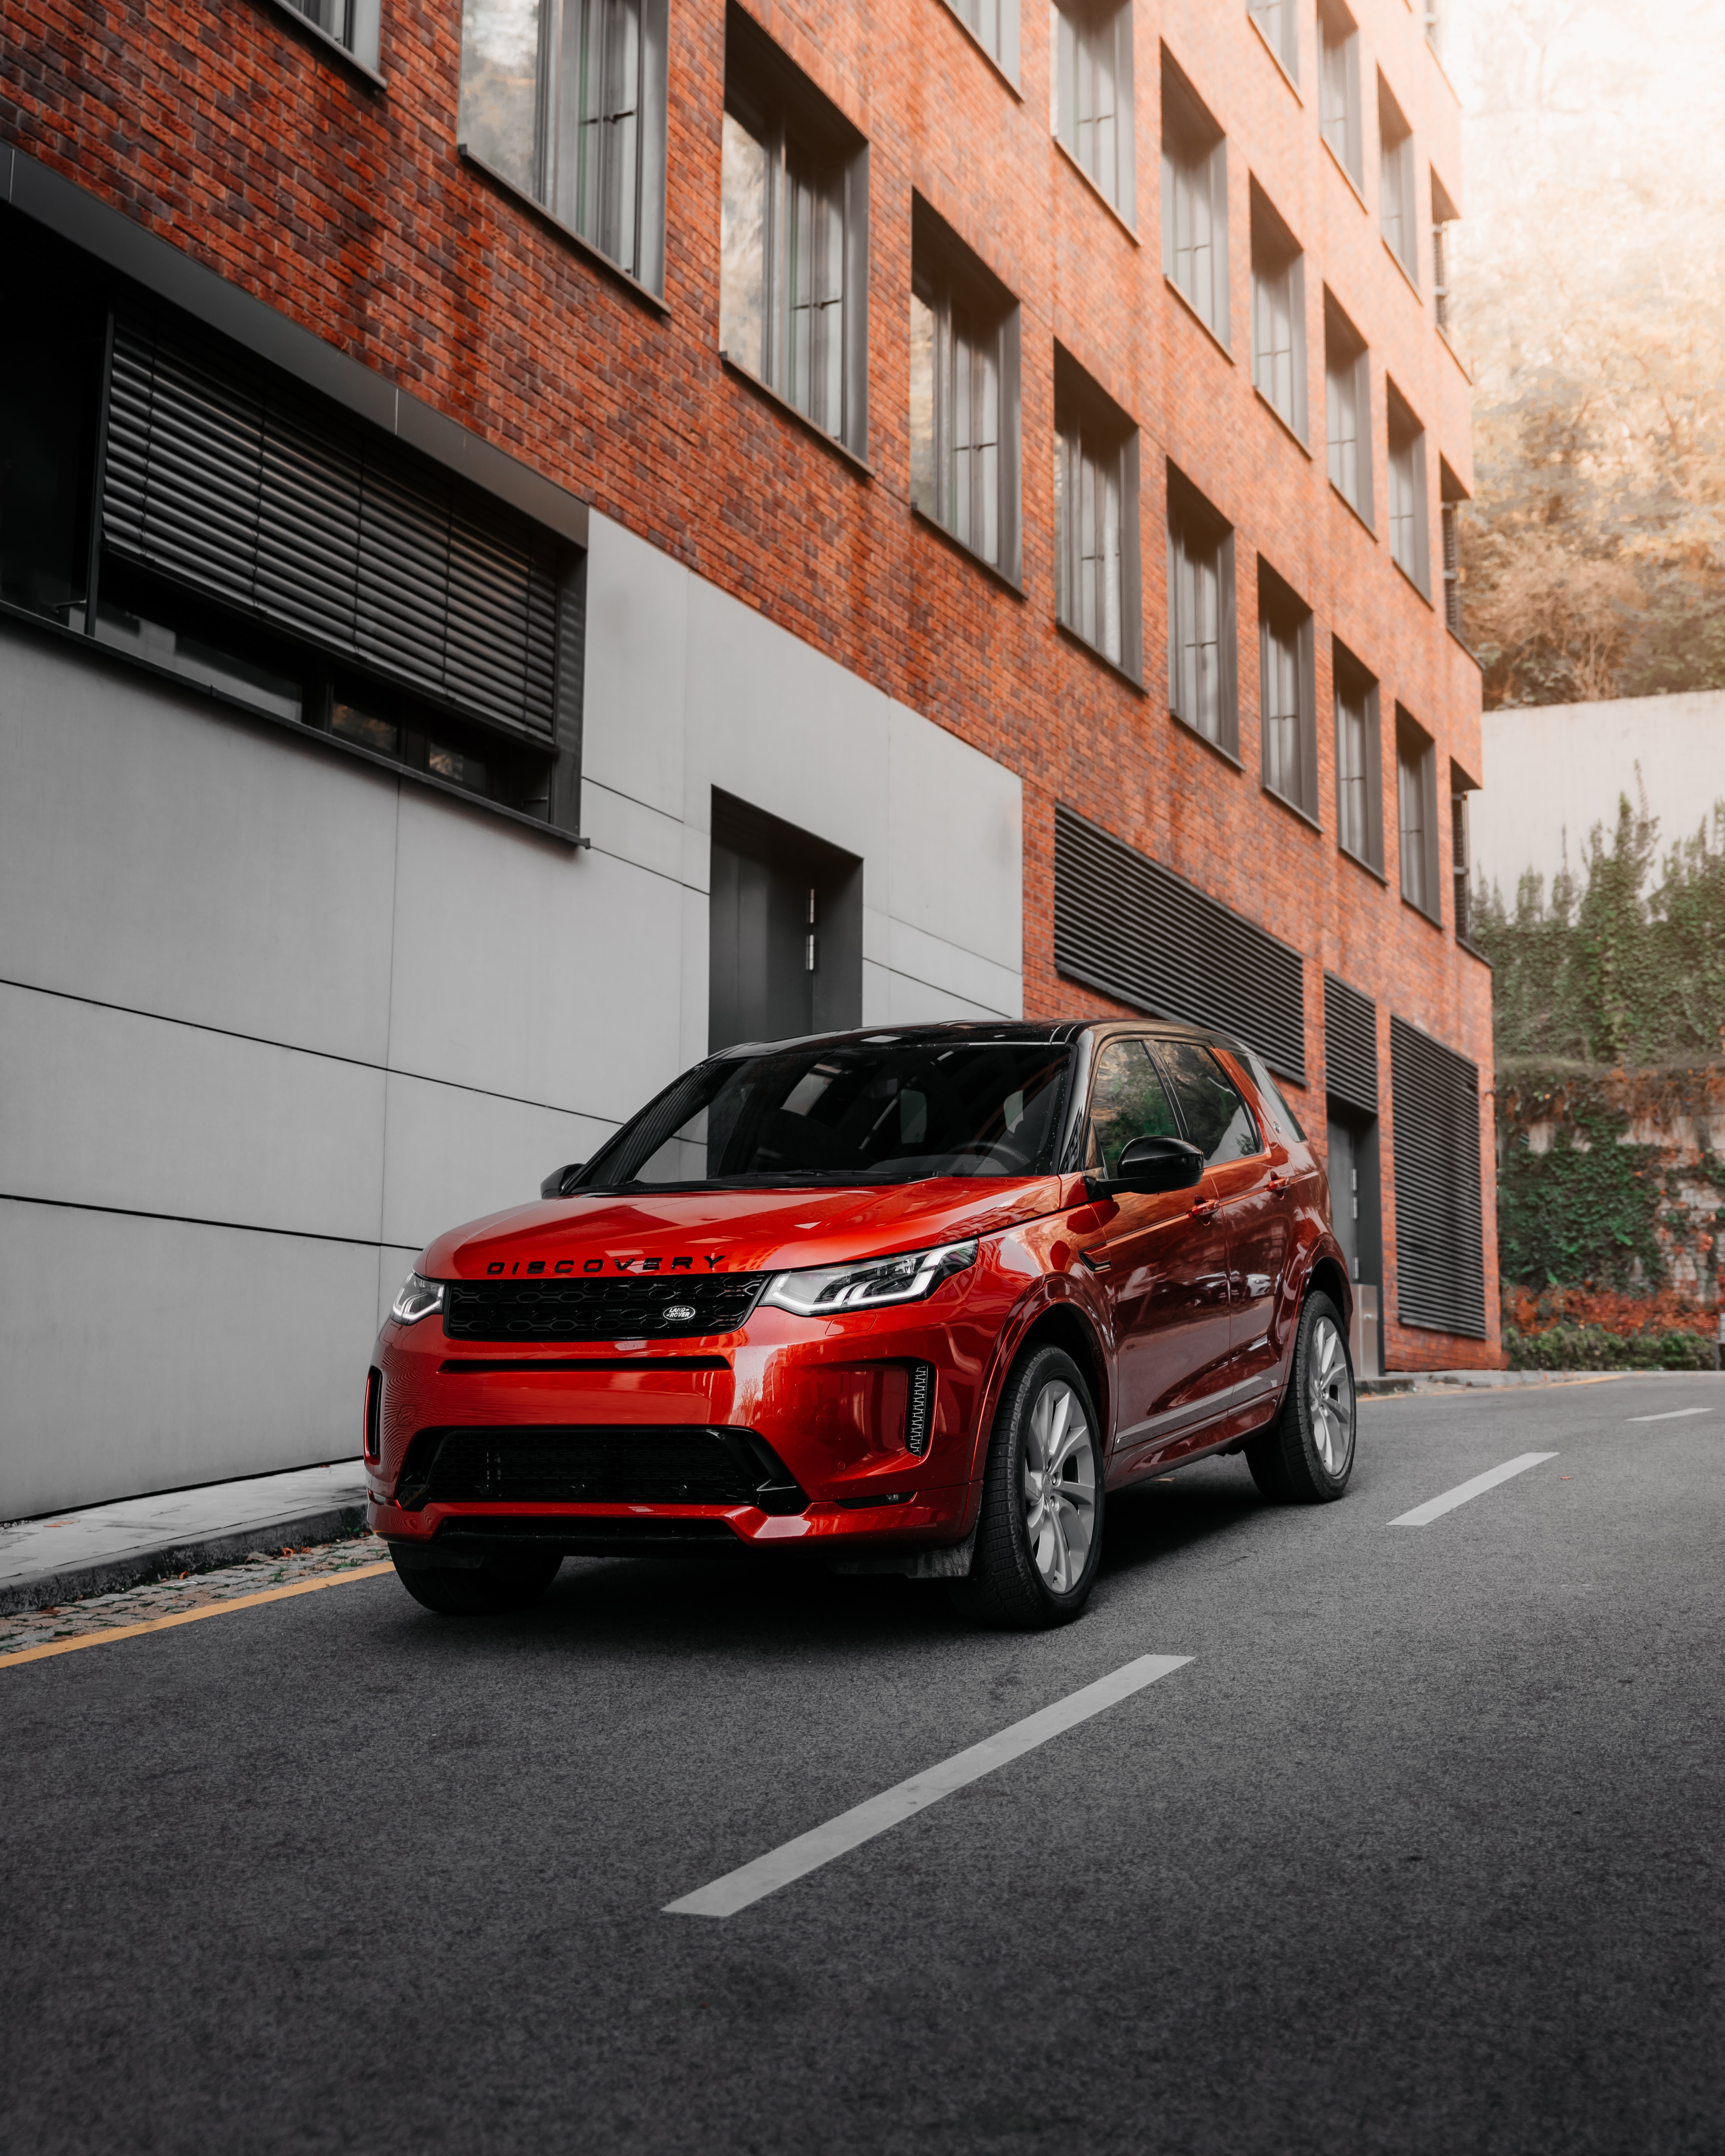 land rover, suv, land rover discovery, car, cars, red